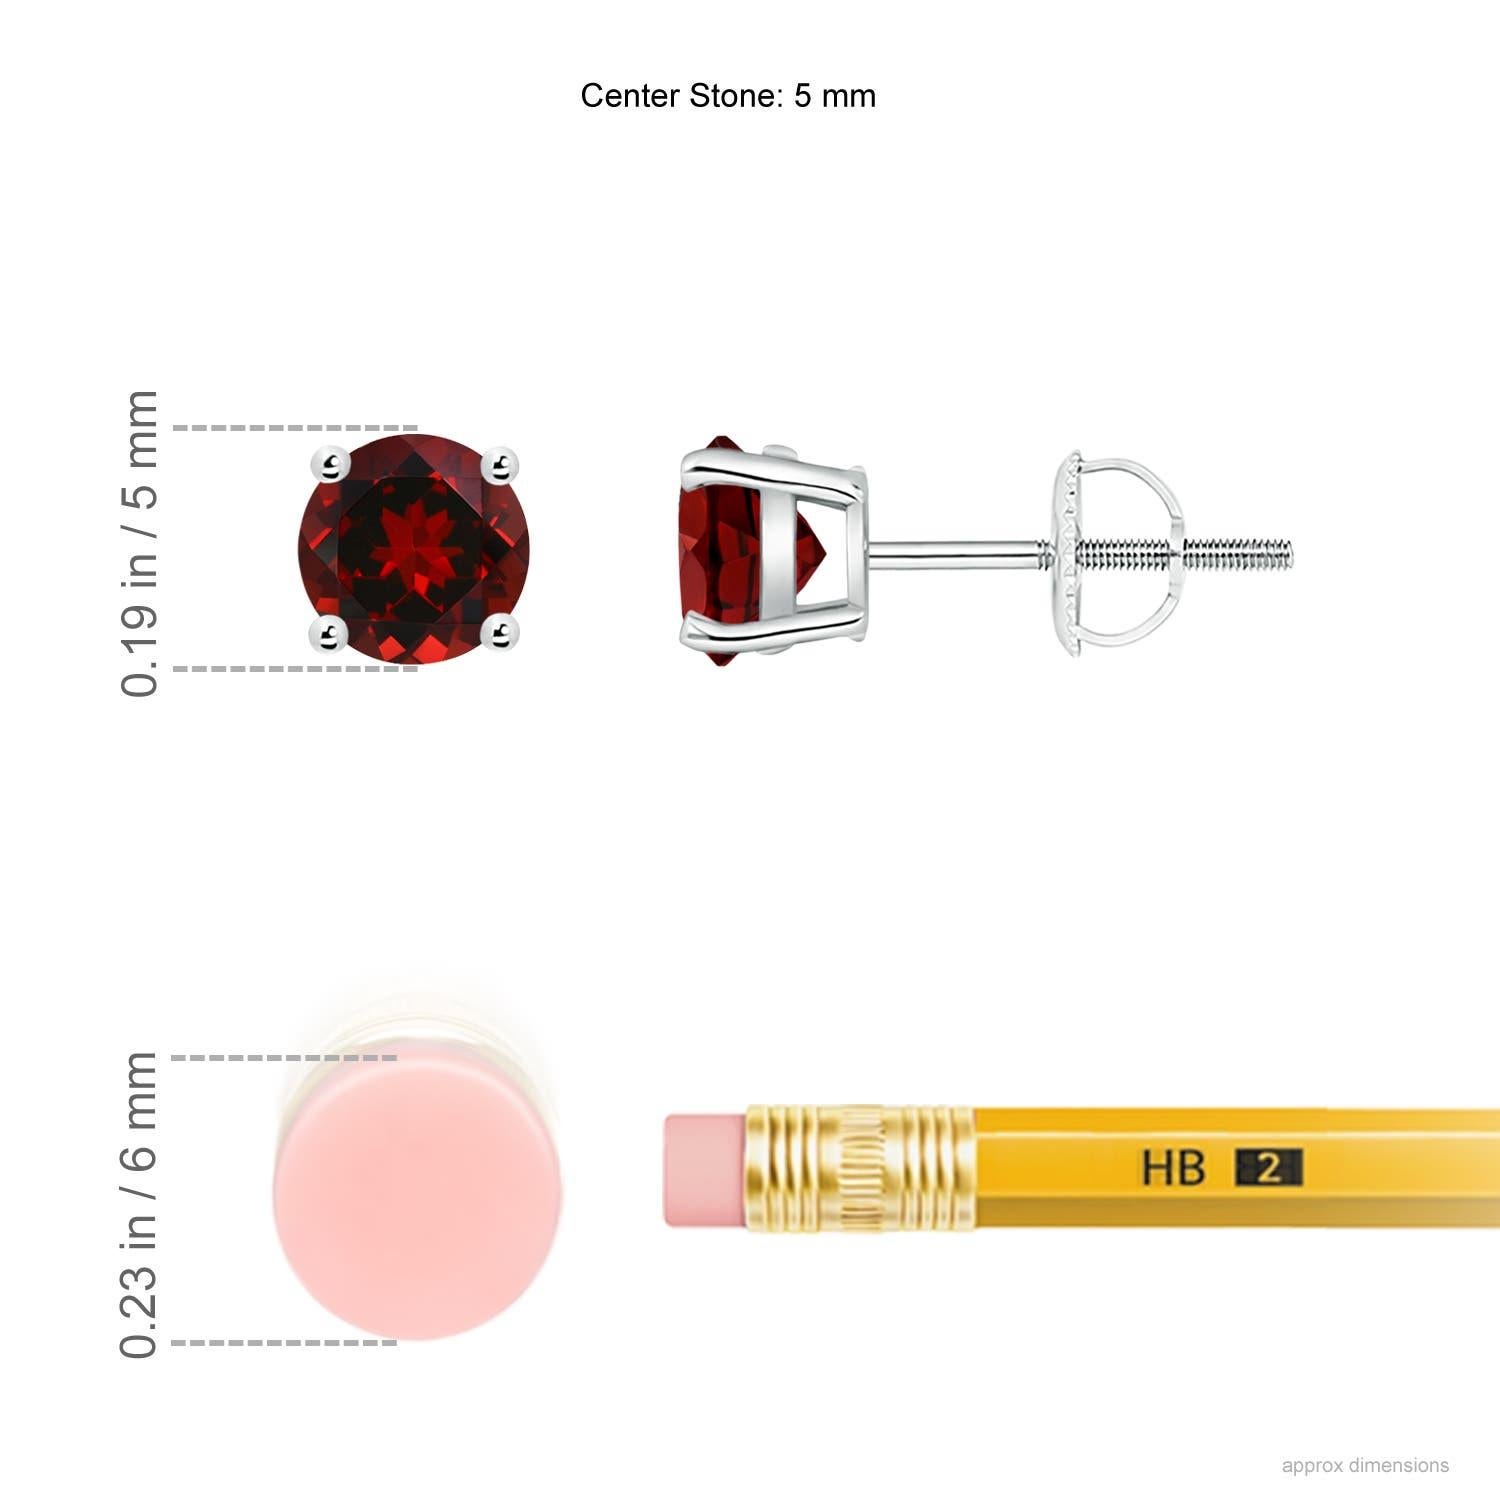 The beauty of these classic garnet stud earrings lies in their simple design and deep red hue. Secured in a platinum basket prong setting, the round garnets look elegant.